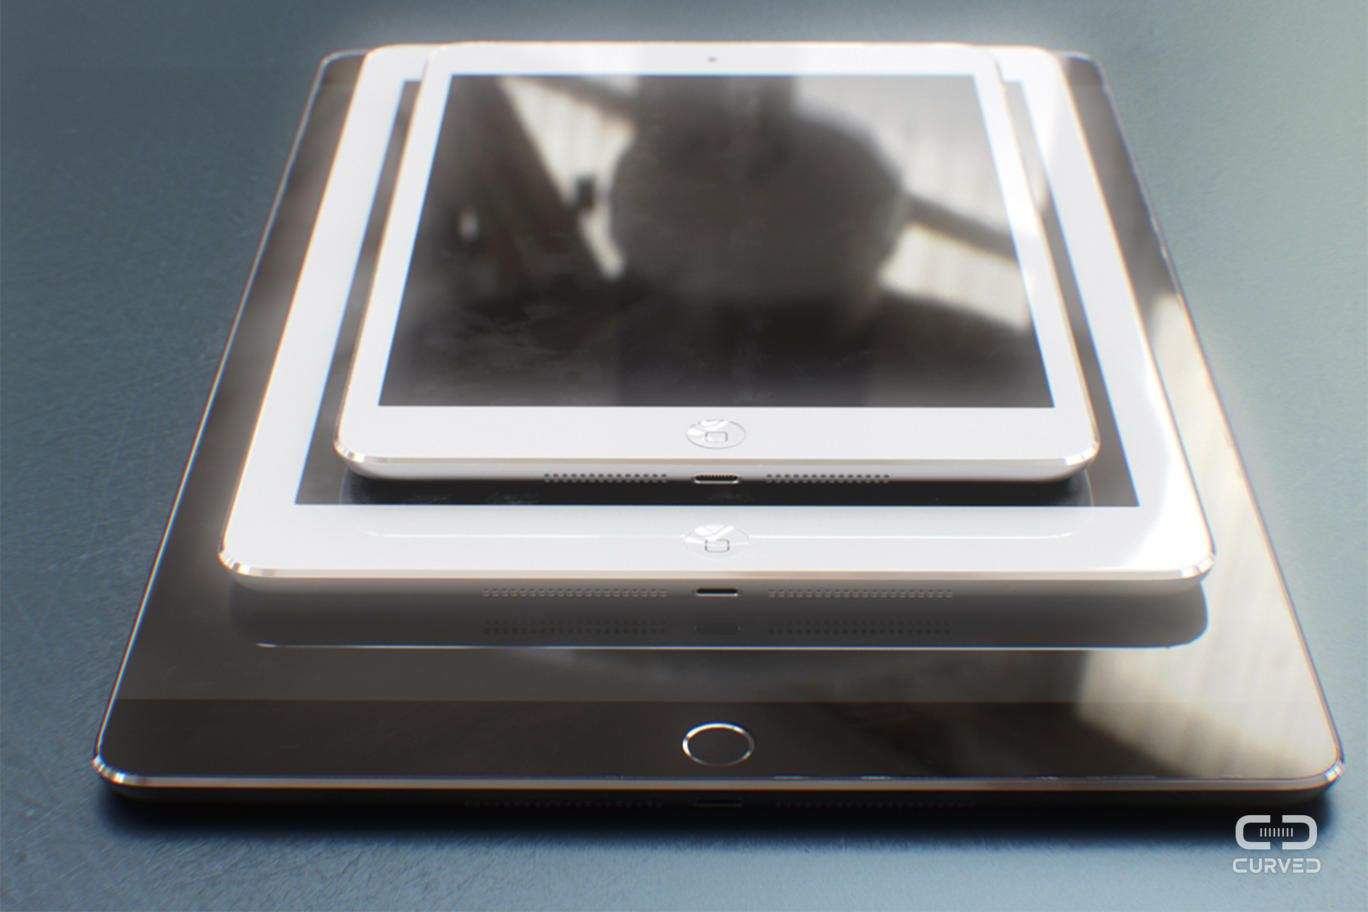 Are you ready for the giant-sized iPad Pro? We are. Photo: CURVED